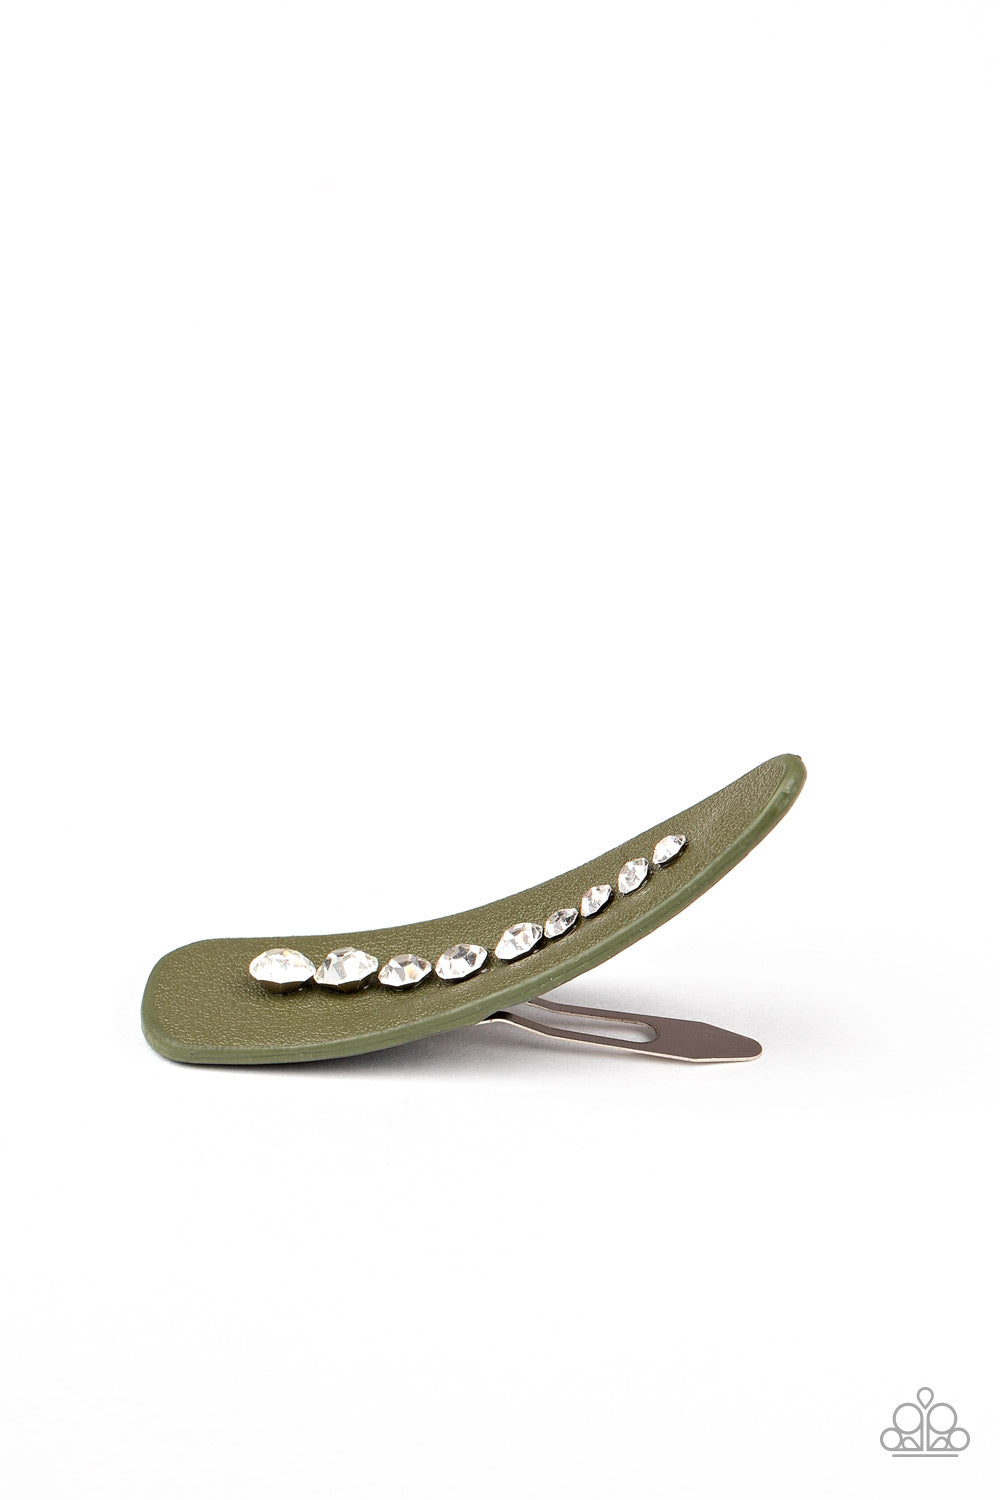 Snap Out Of It Hair Clip (Brown, Green)